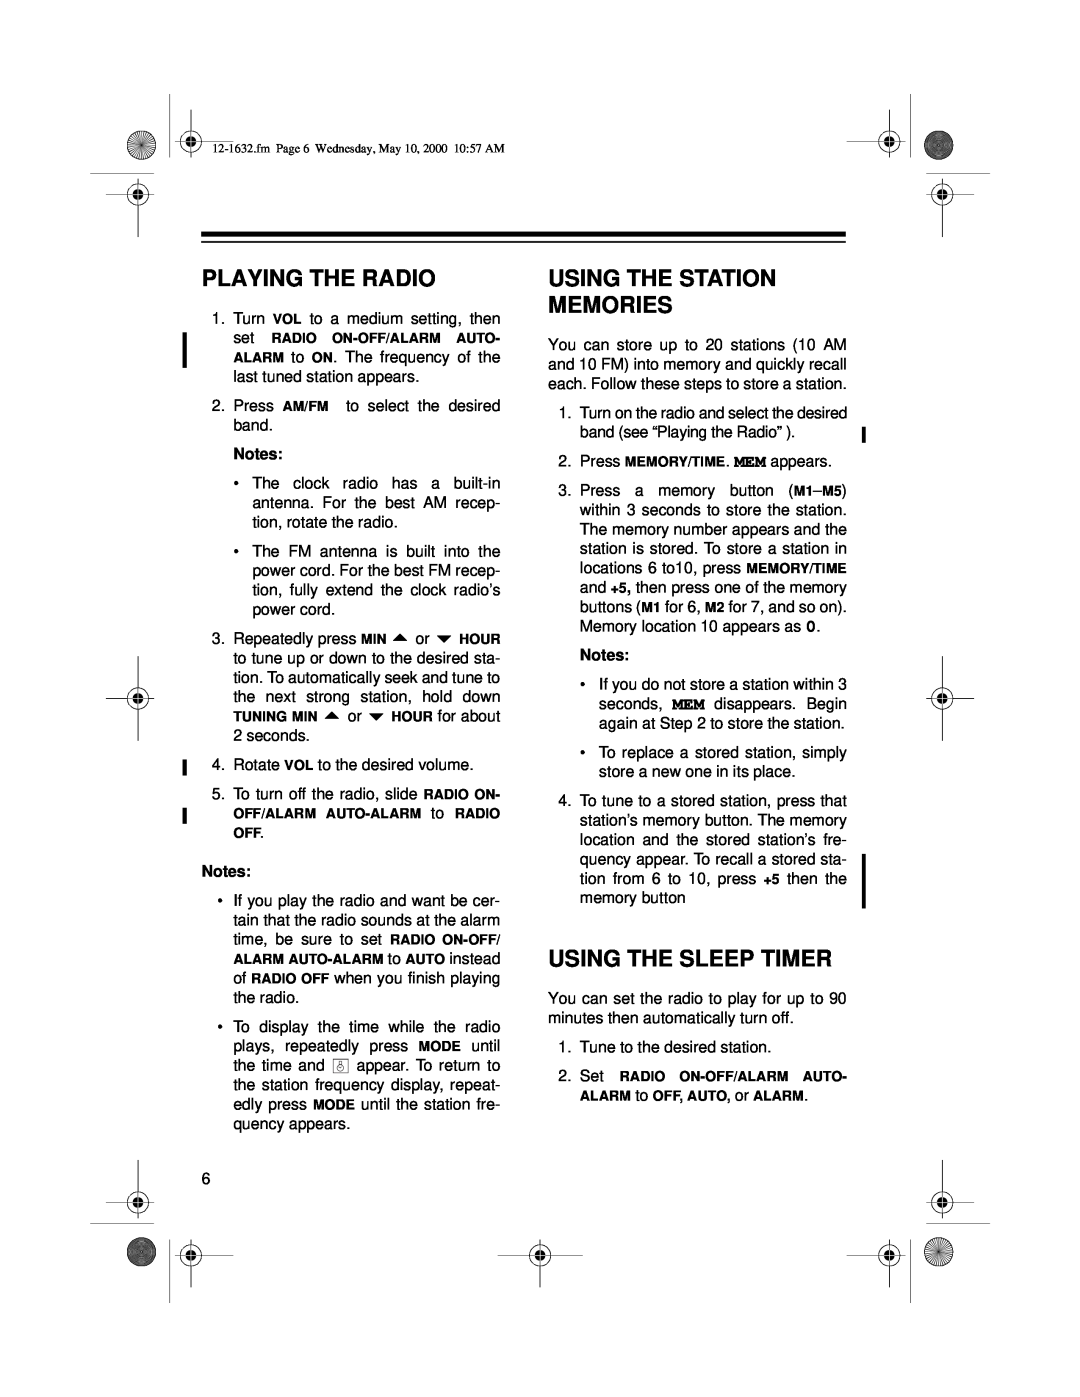 Radio Shack 12-1632 owner manual Playing The Radio, Using The Station Memories, Using The Sleep Timer 